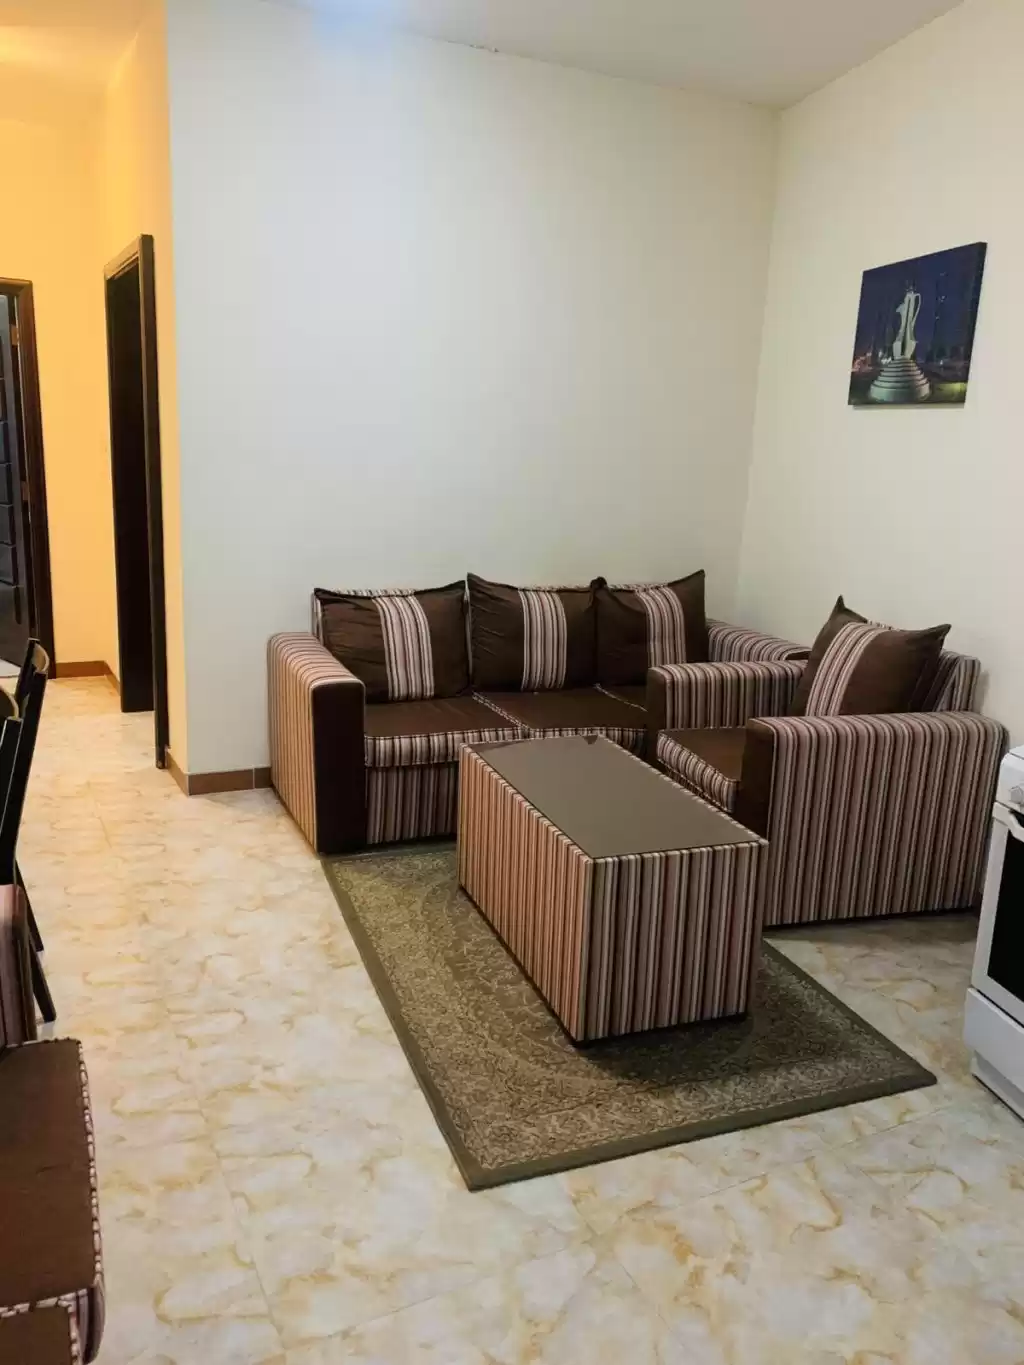 Residential Ready Property 1 Bedroom F/F Apartment  for rent in Al Sadd , Doha #10988 - 1  image 